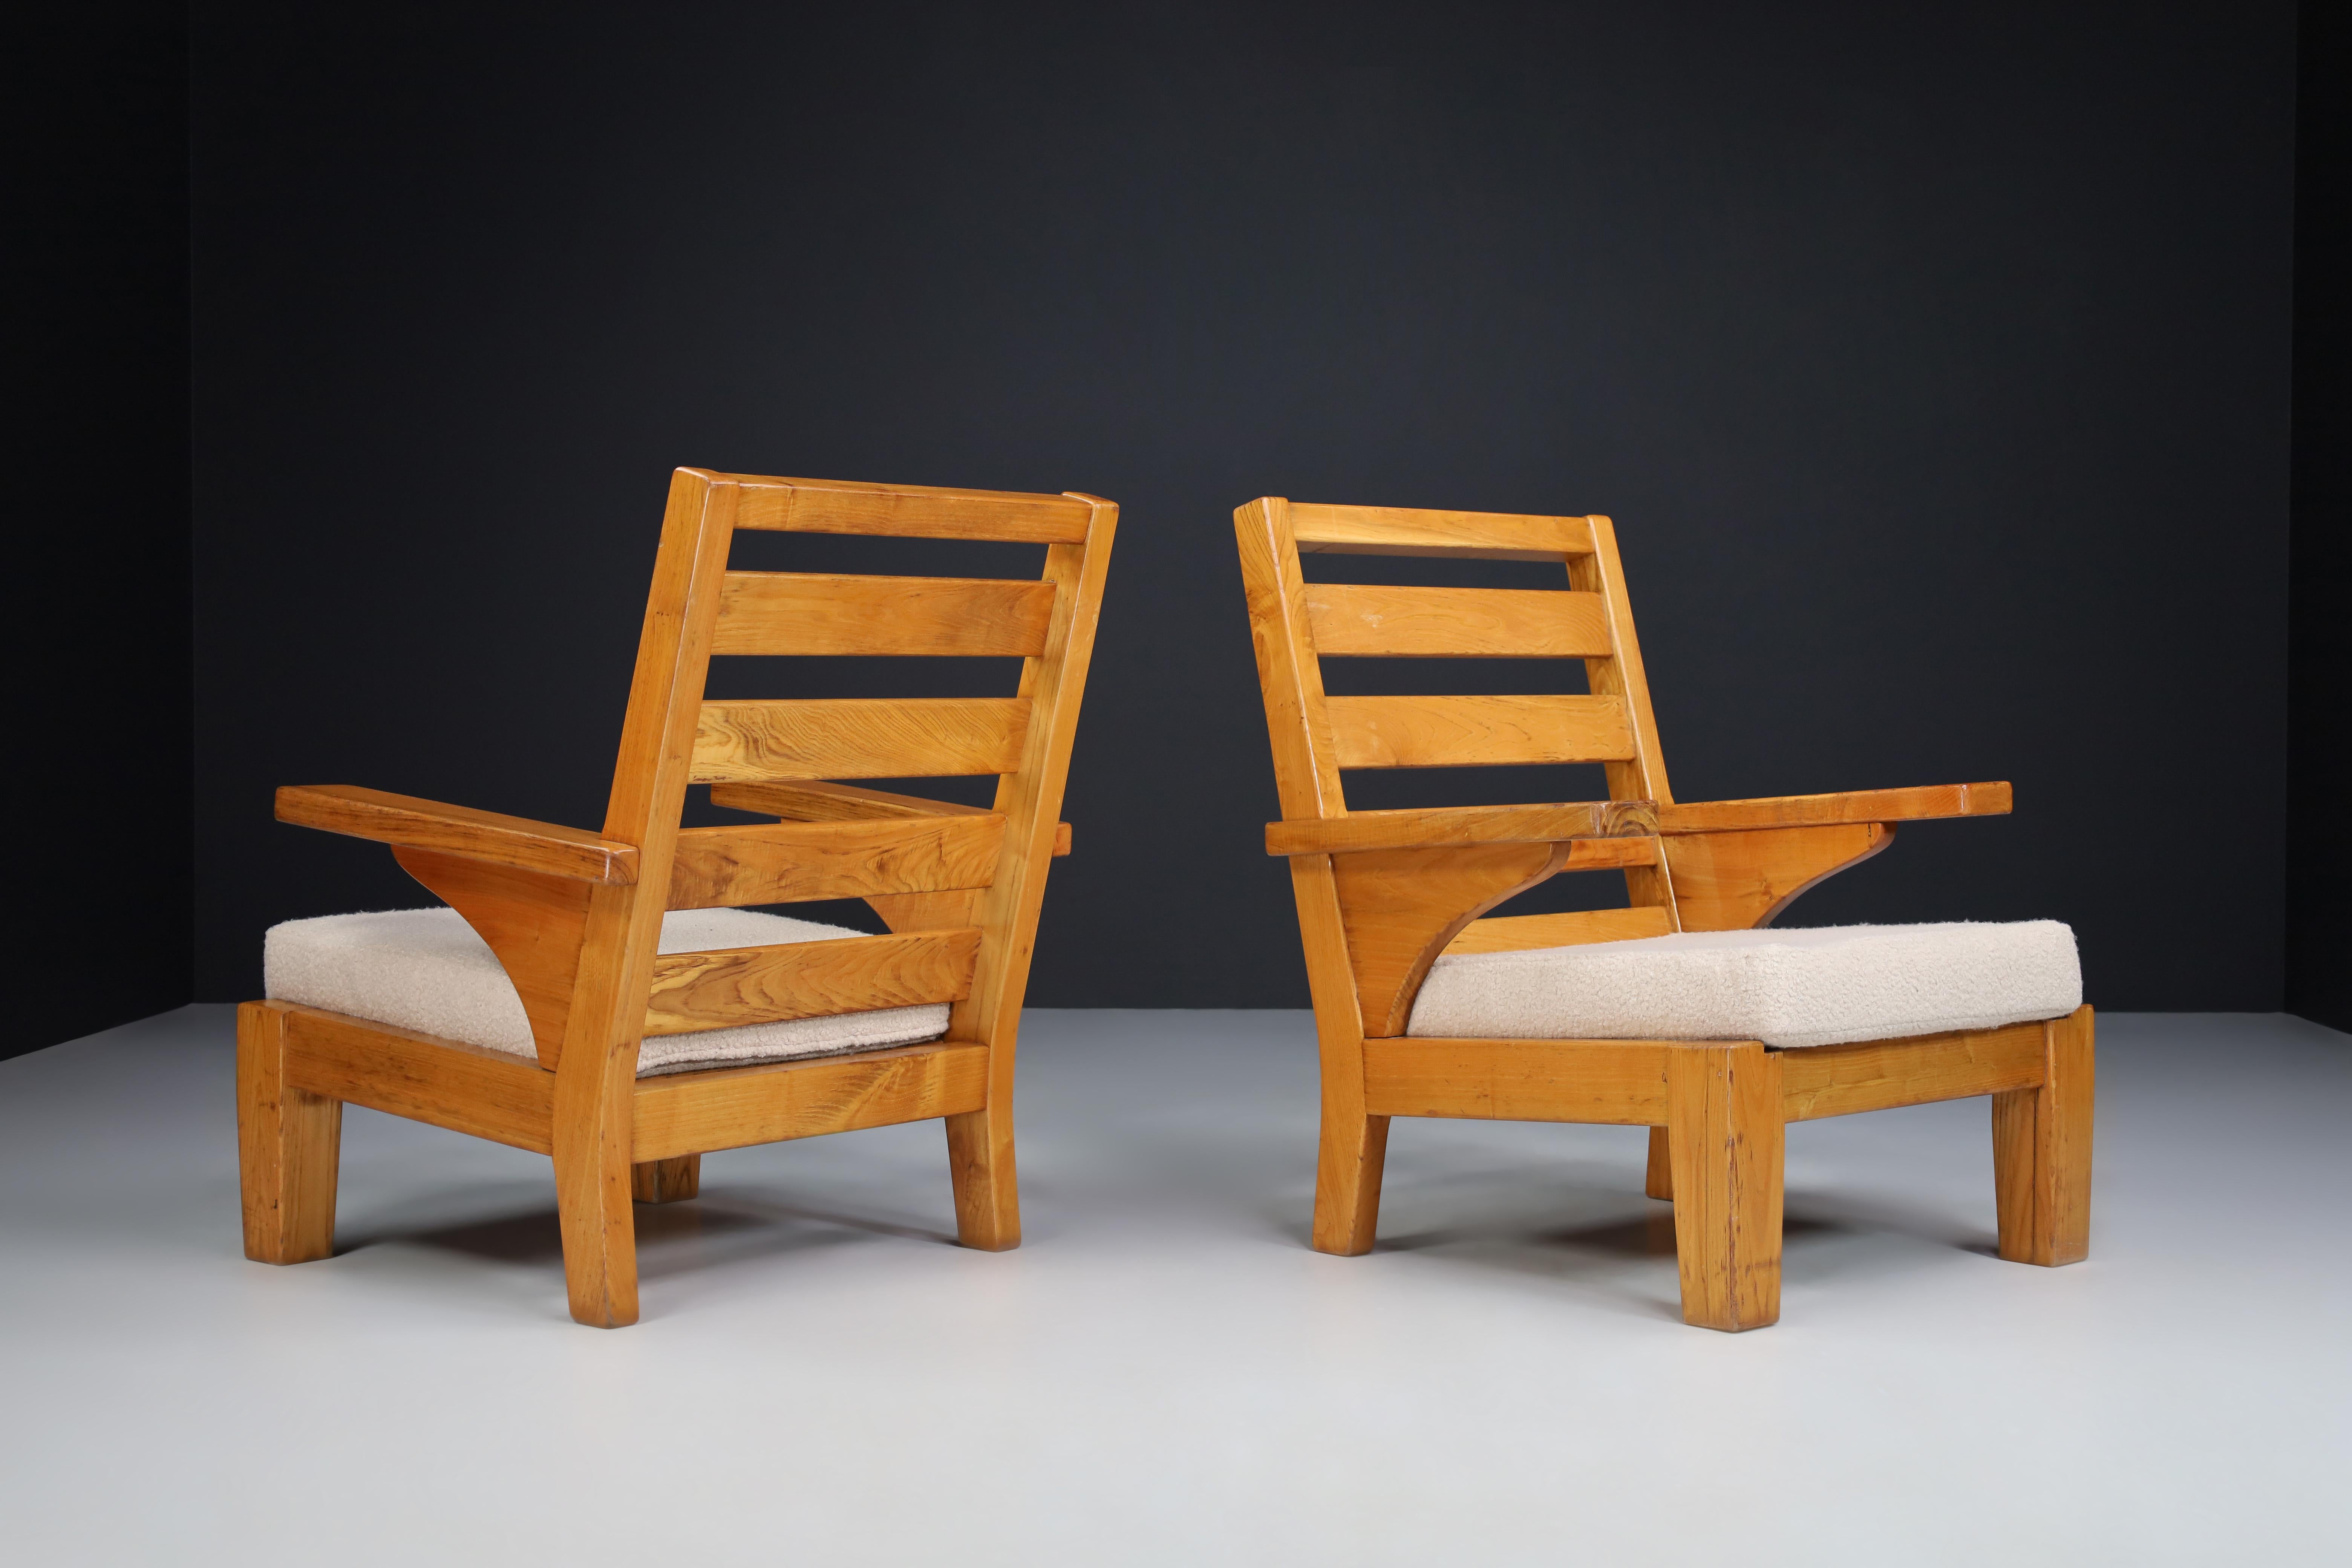 Patinated Pine and teddy fabric lounge chairs, Spain 1960s

Robust pair of two lounge chairs made of pinewood and re-upholstered teddy fabric designed and made in Spain in the 1960s. These two armchairs would be an eye-catching addition to any